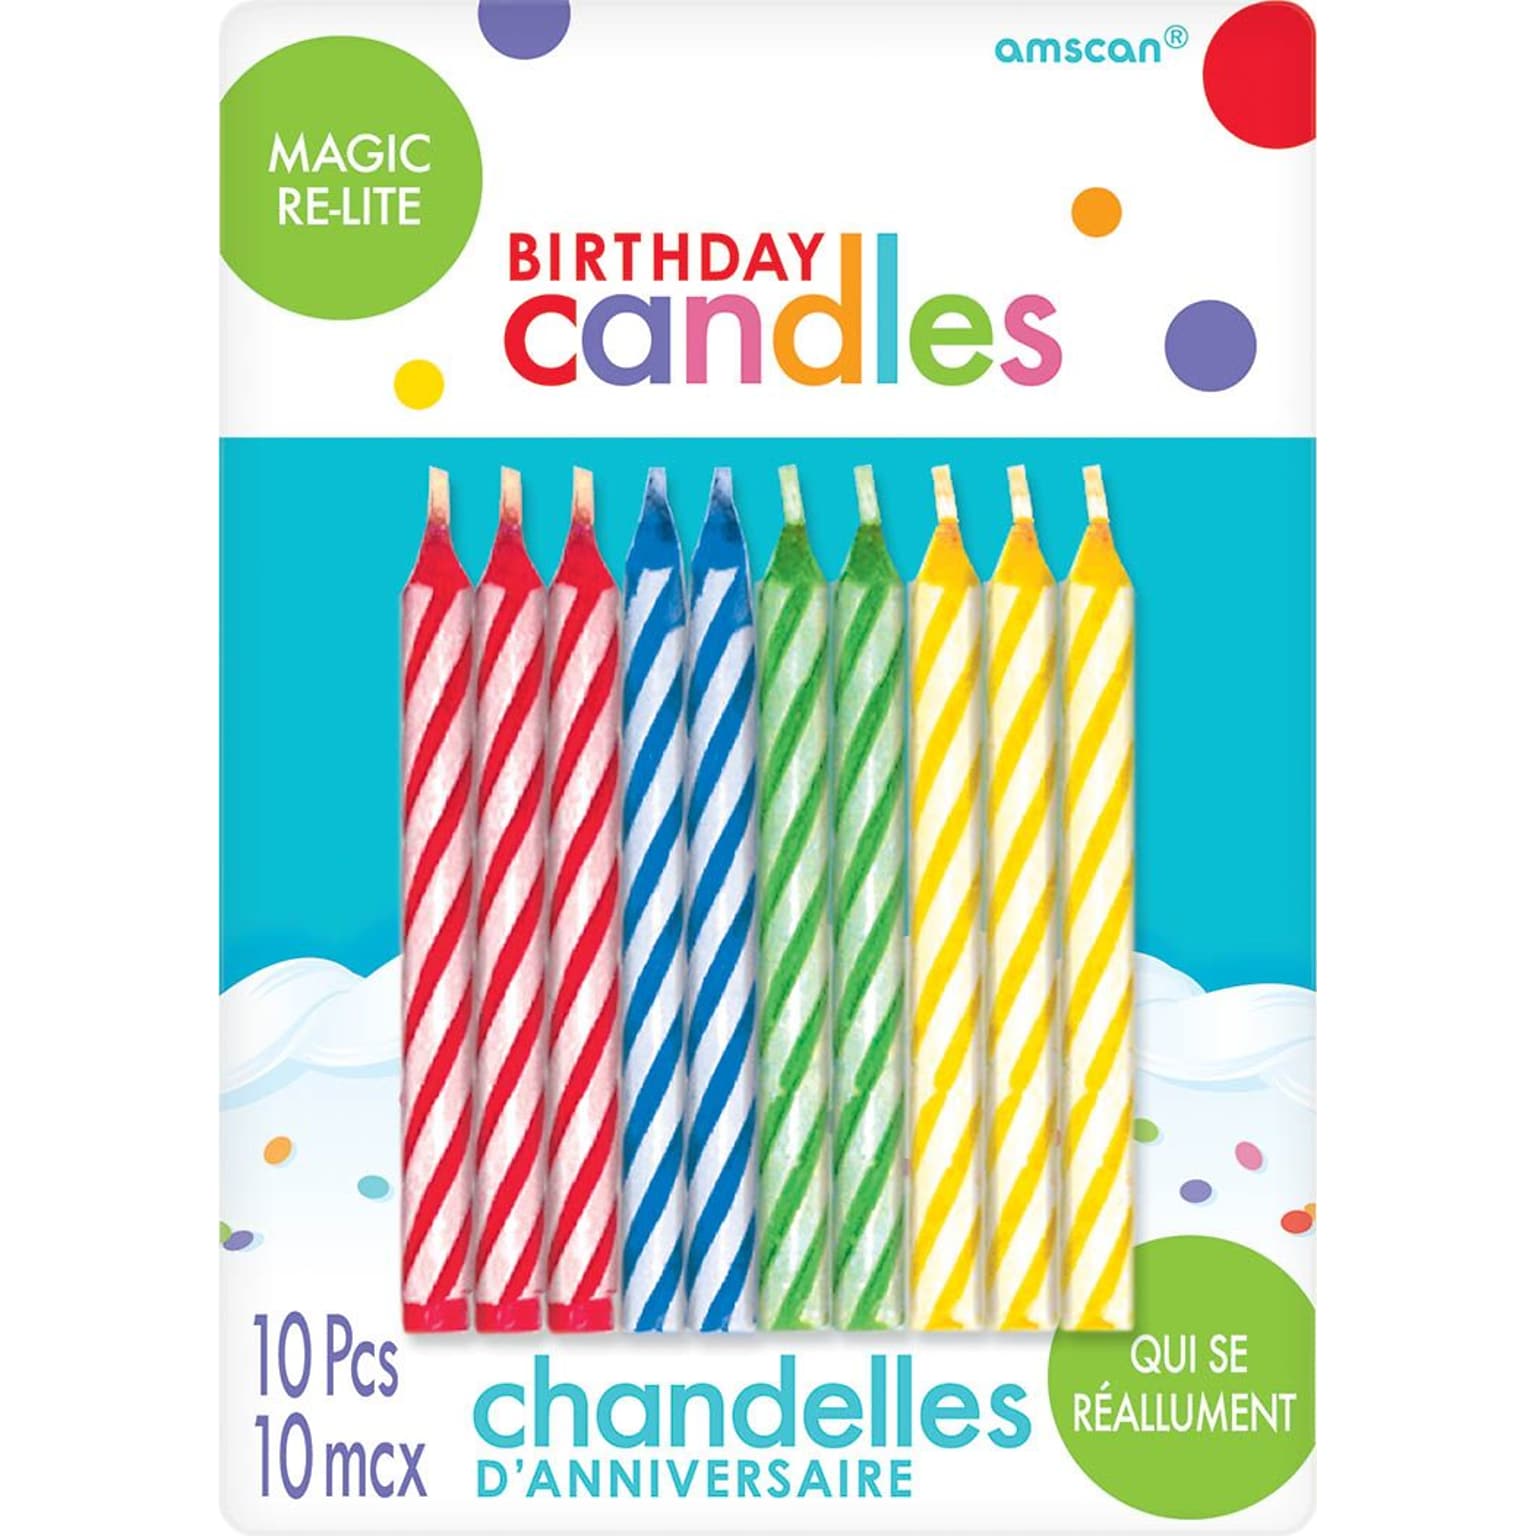 Amscan Spiral Design Re-Light Birthday Candles, 2.5, Red, Blue, Green, Yellow, 12/Pack, 10 Per Pack (8065.99)